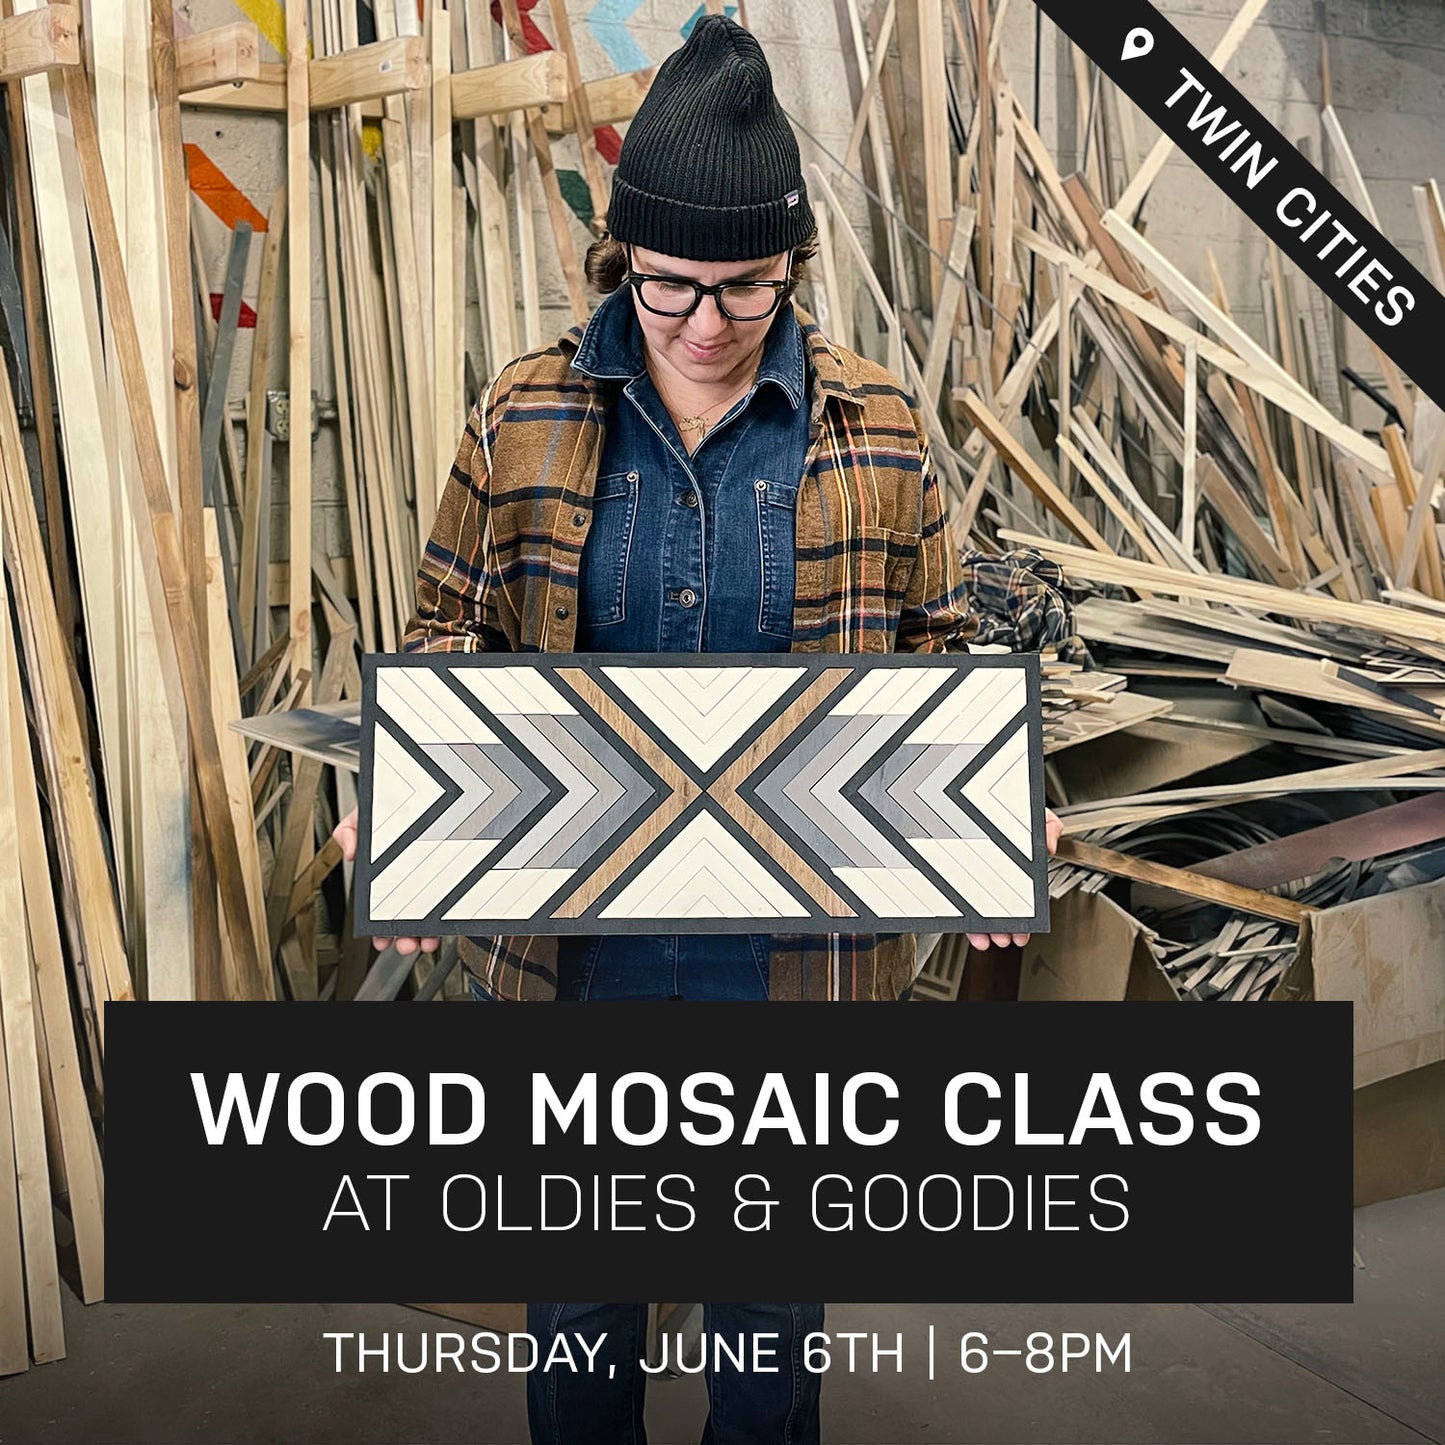 Quill Wood Mosaic Class at Oldies & Goodies | June 6th @ 6pm